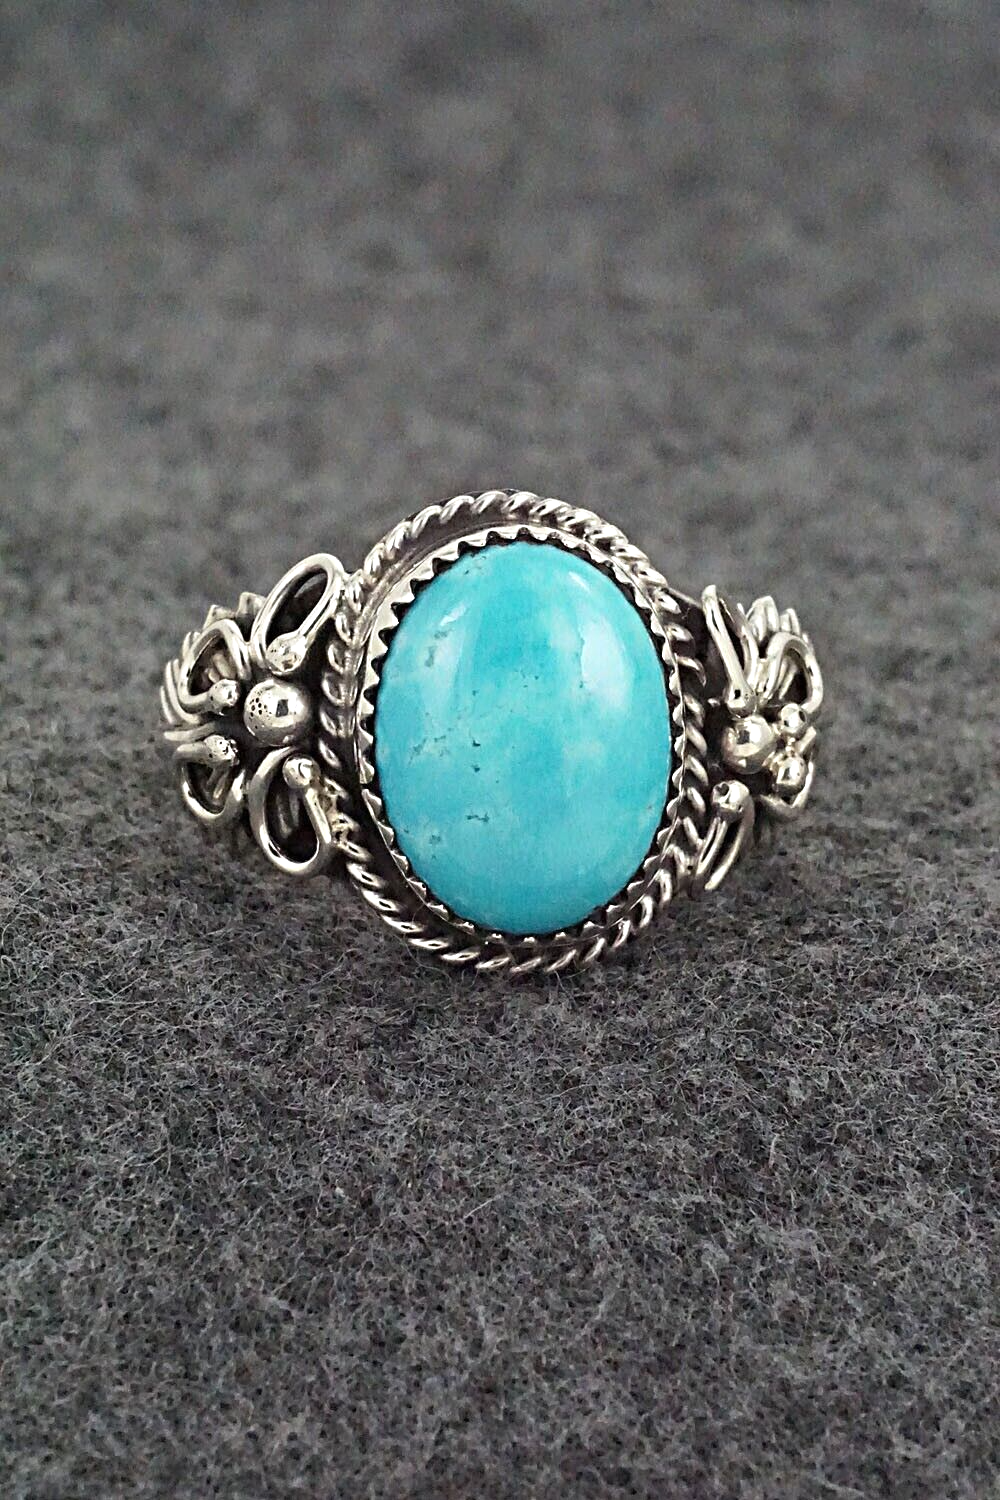 Turquoise & Sterling Silver Ring - Jeannette Saunders - Size 12.5